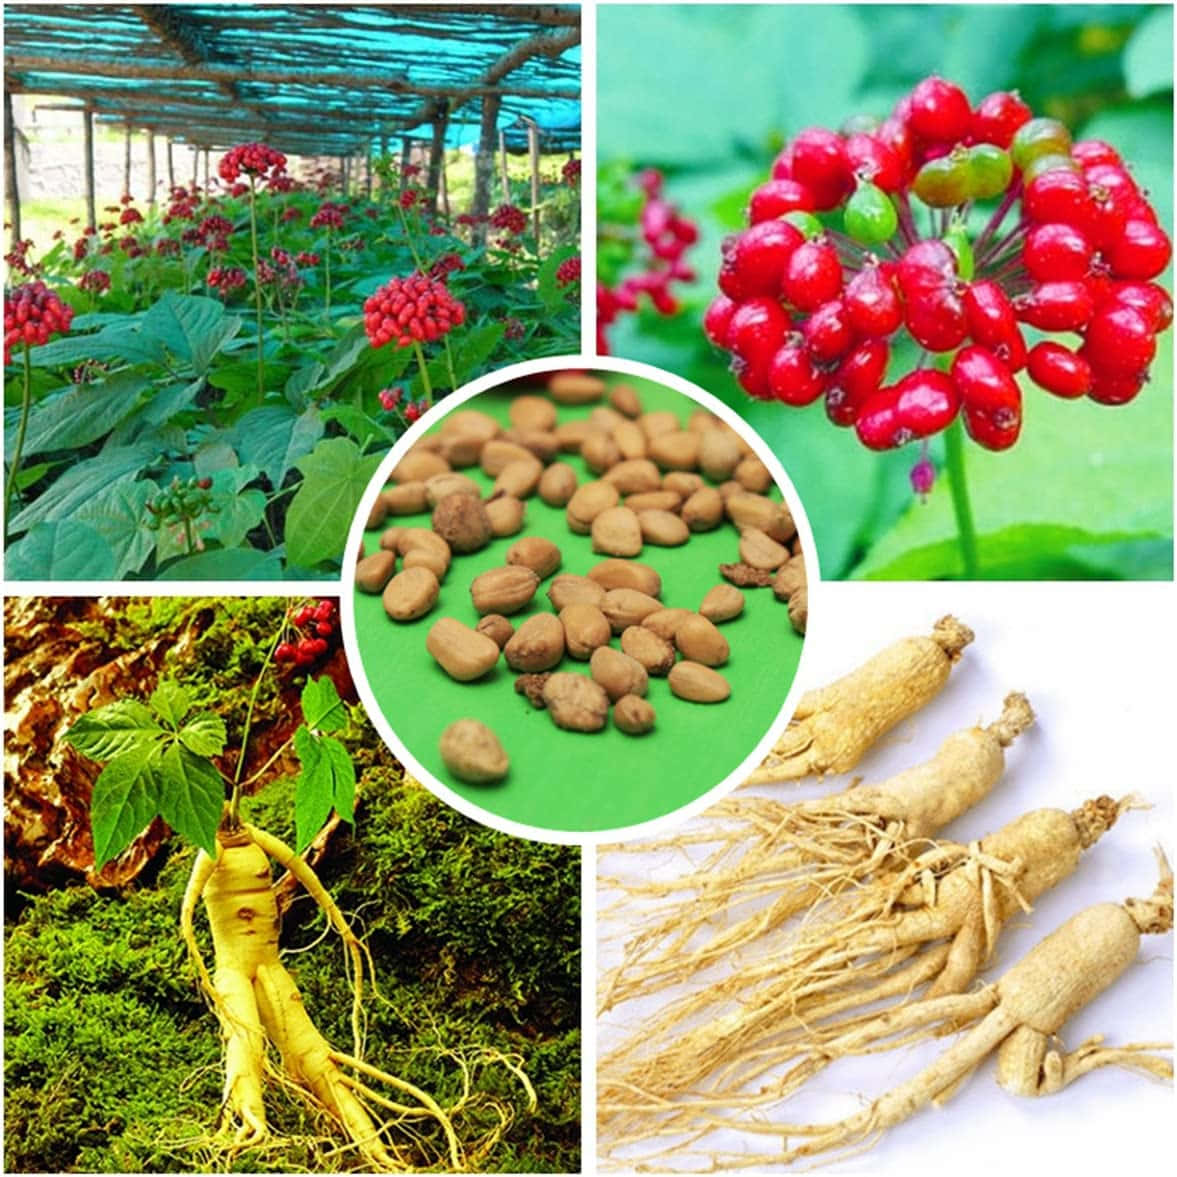 A vibrant red Ginseng Plant